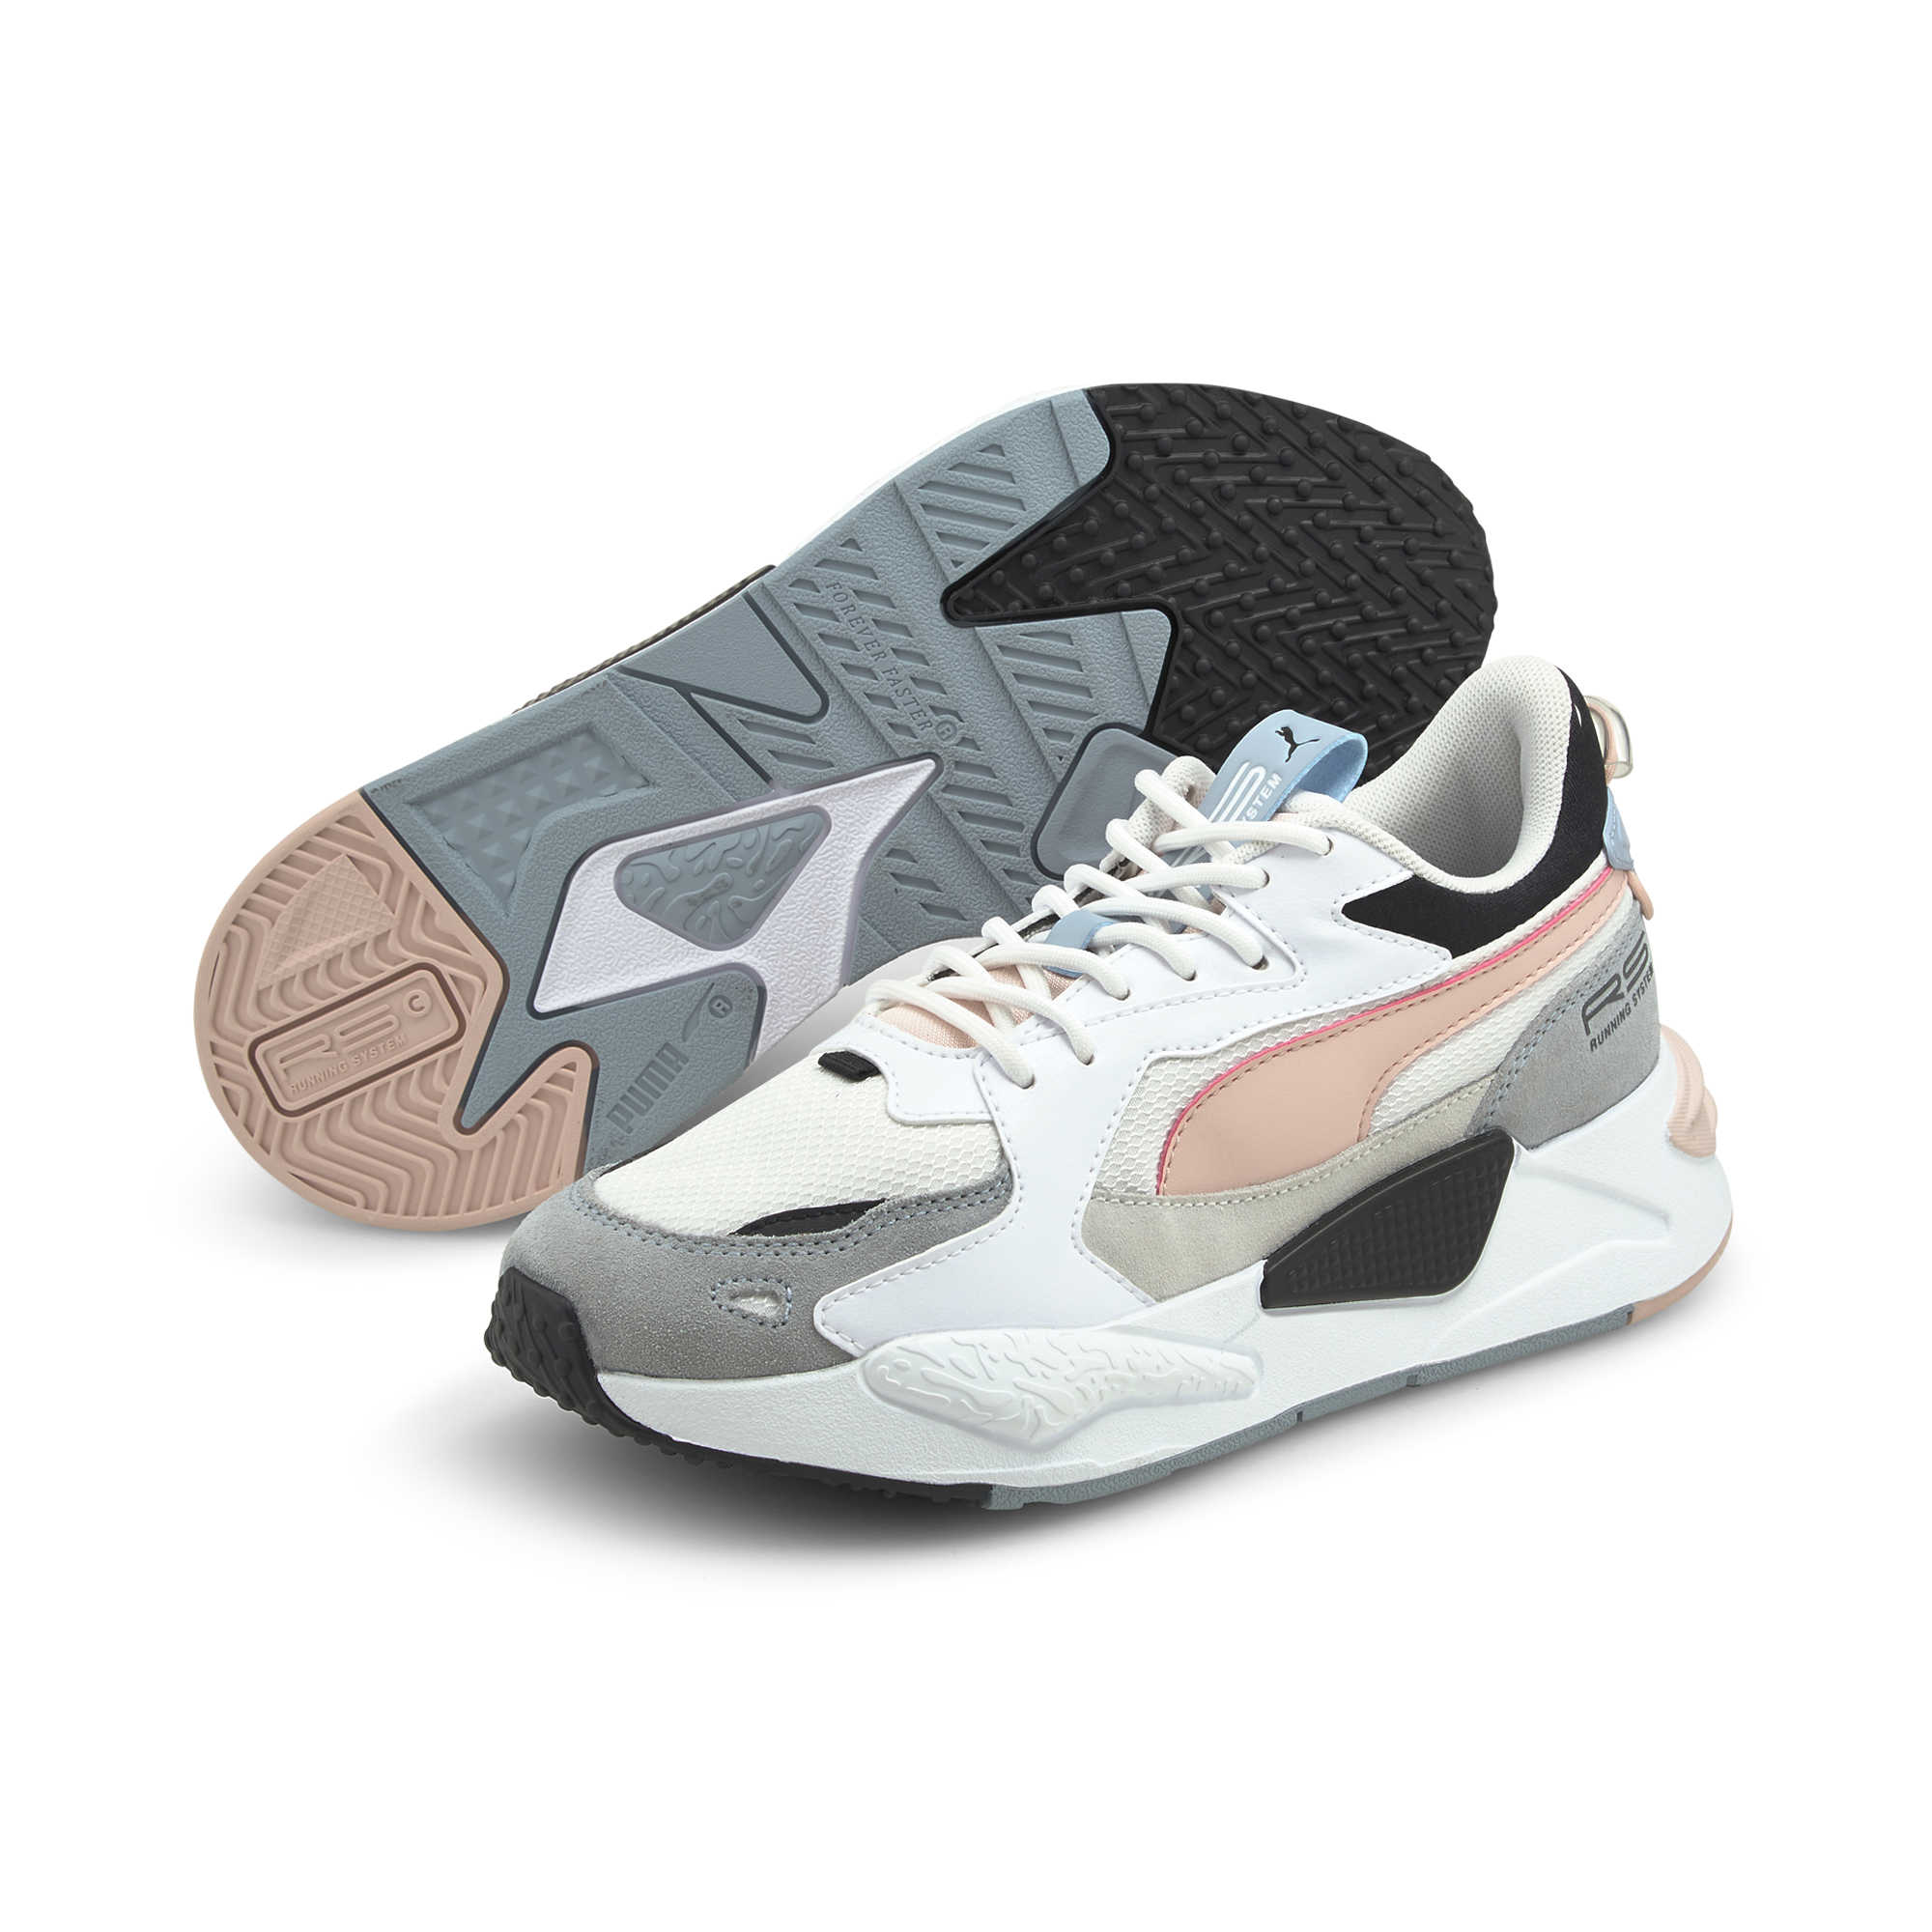 Puma RS-Z Reinvent Wns sneakers, white, 37